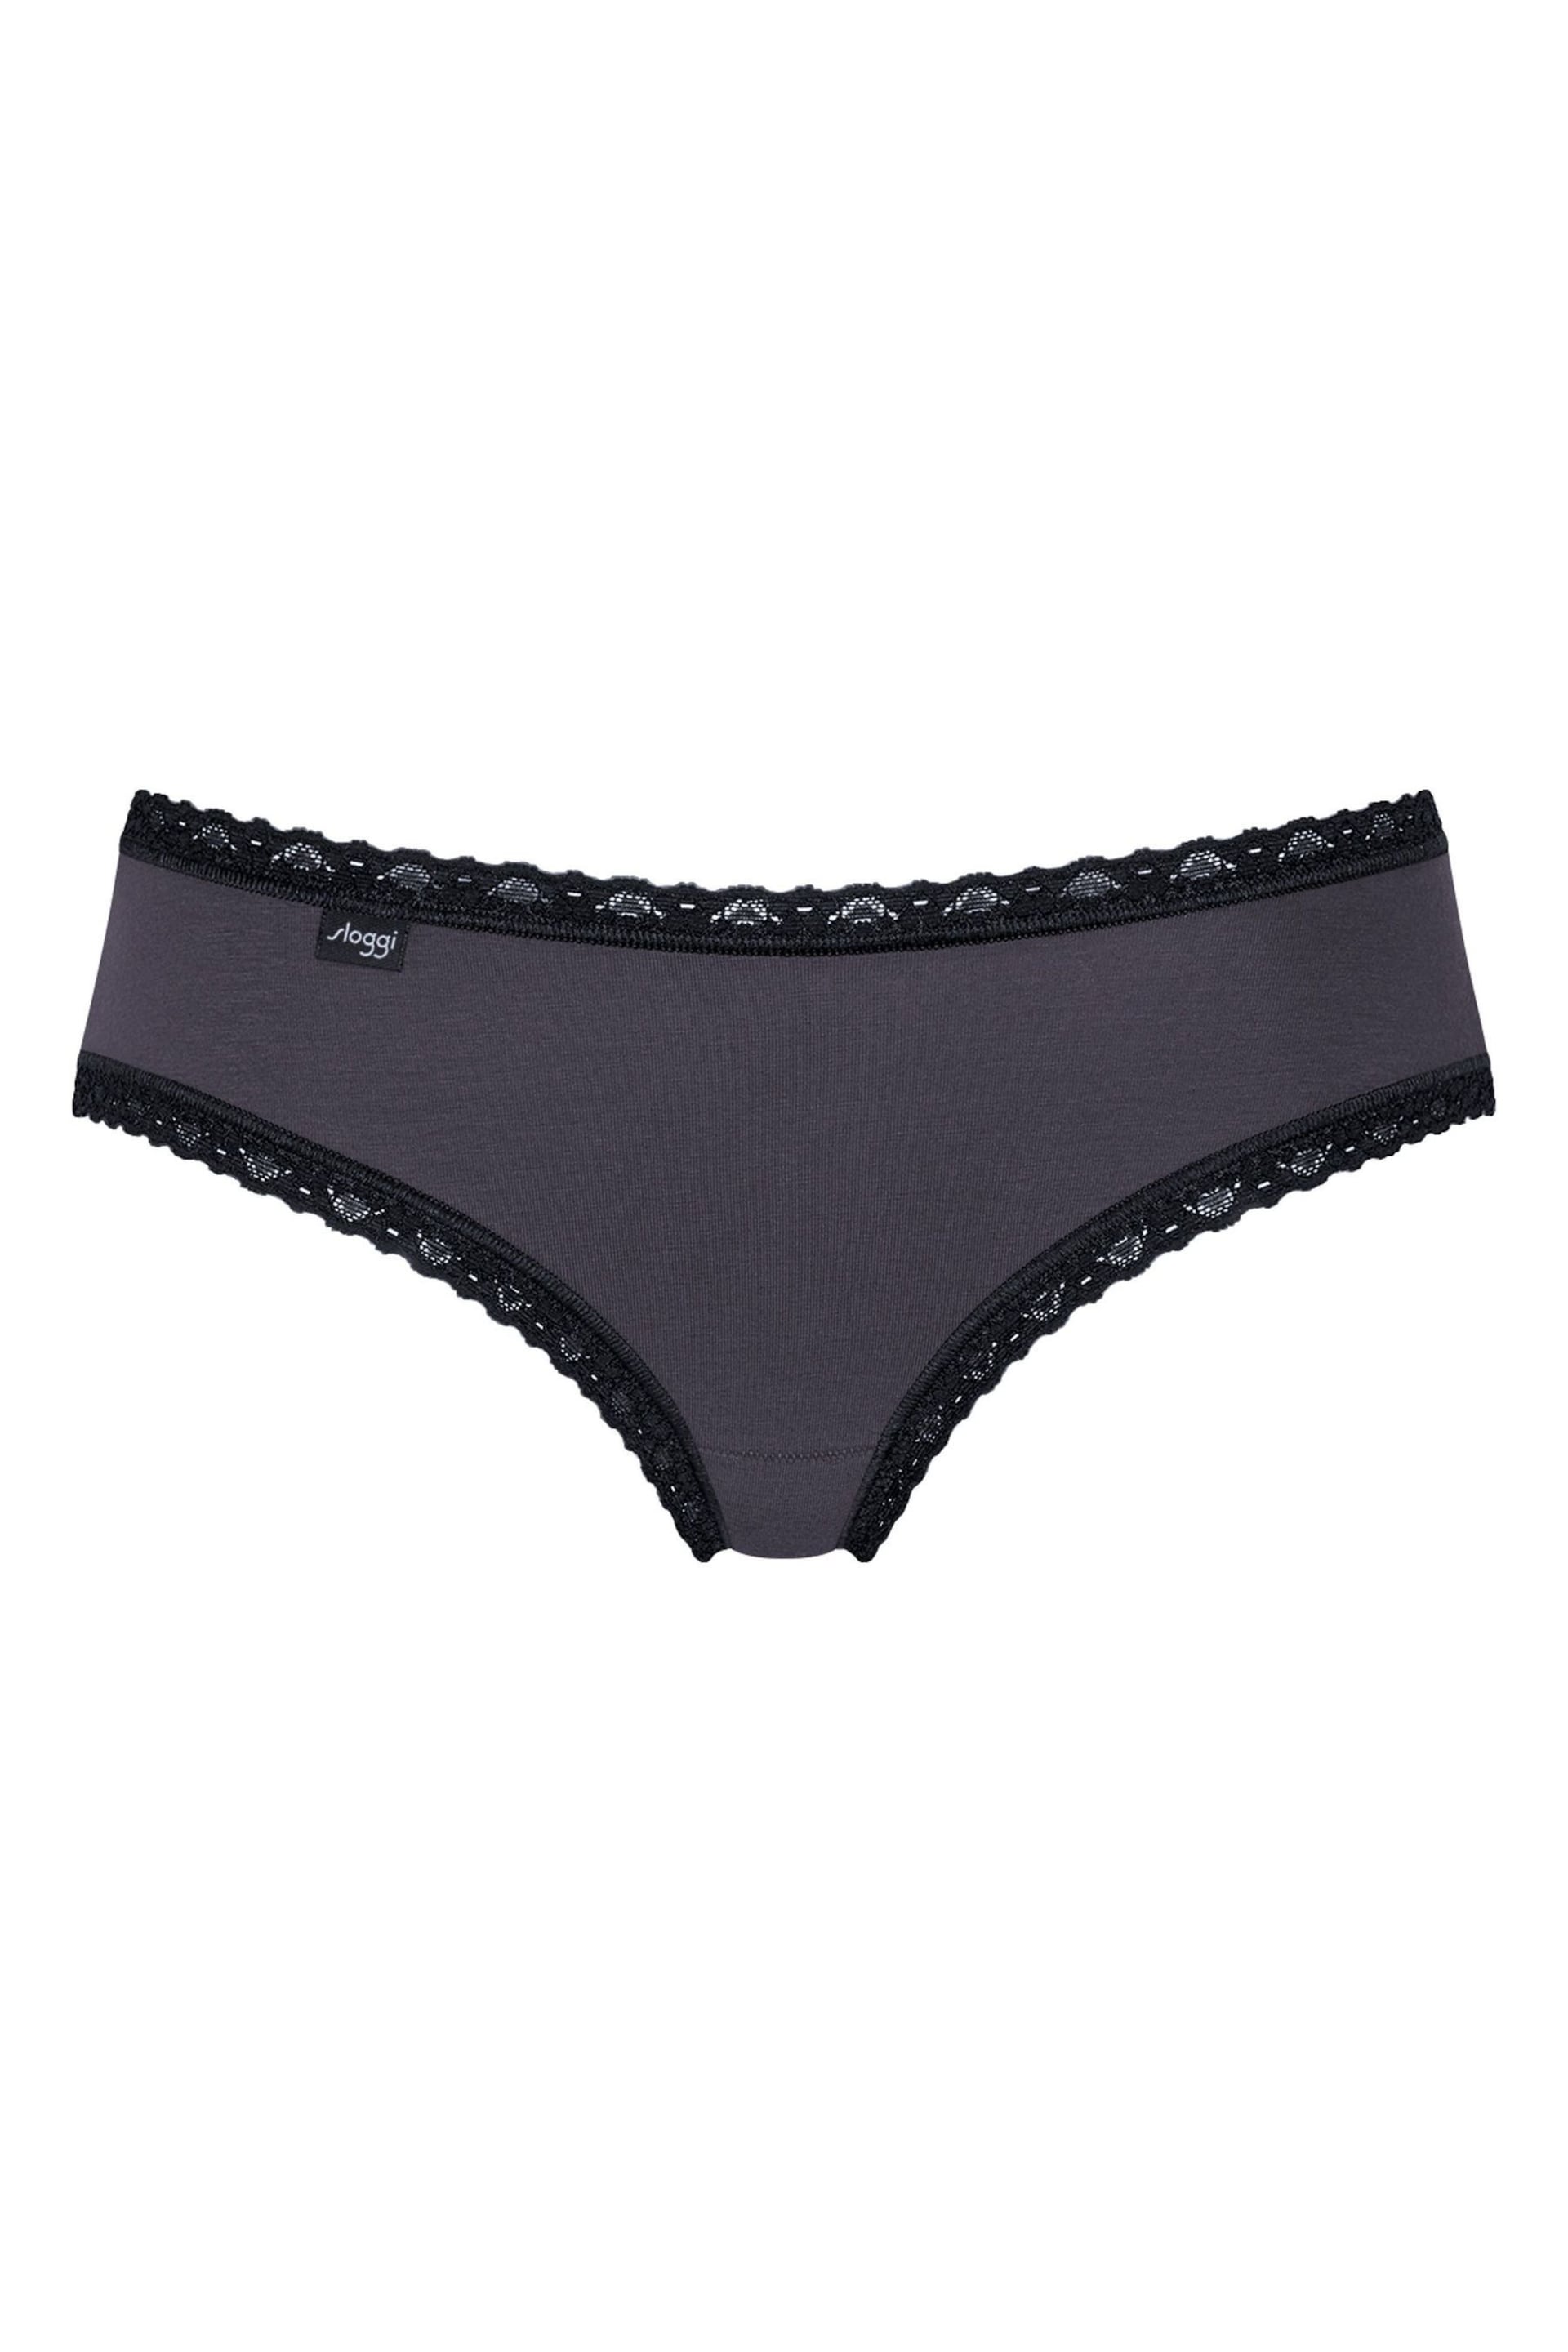 Sloggi 24/7 Weekend Hipster Knickers Three Pack - Image 4 of 6